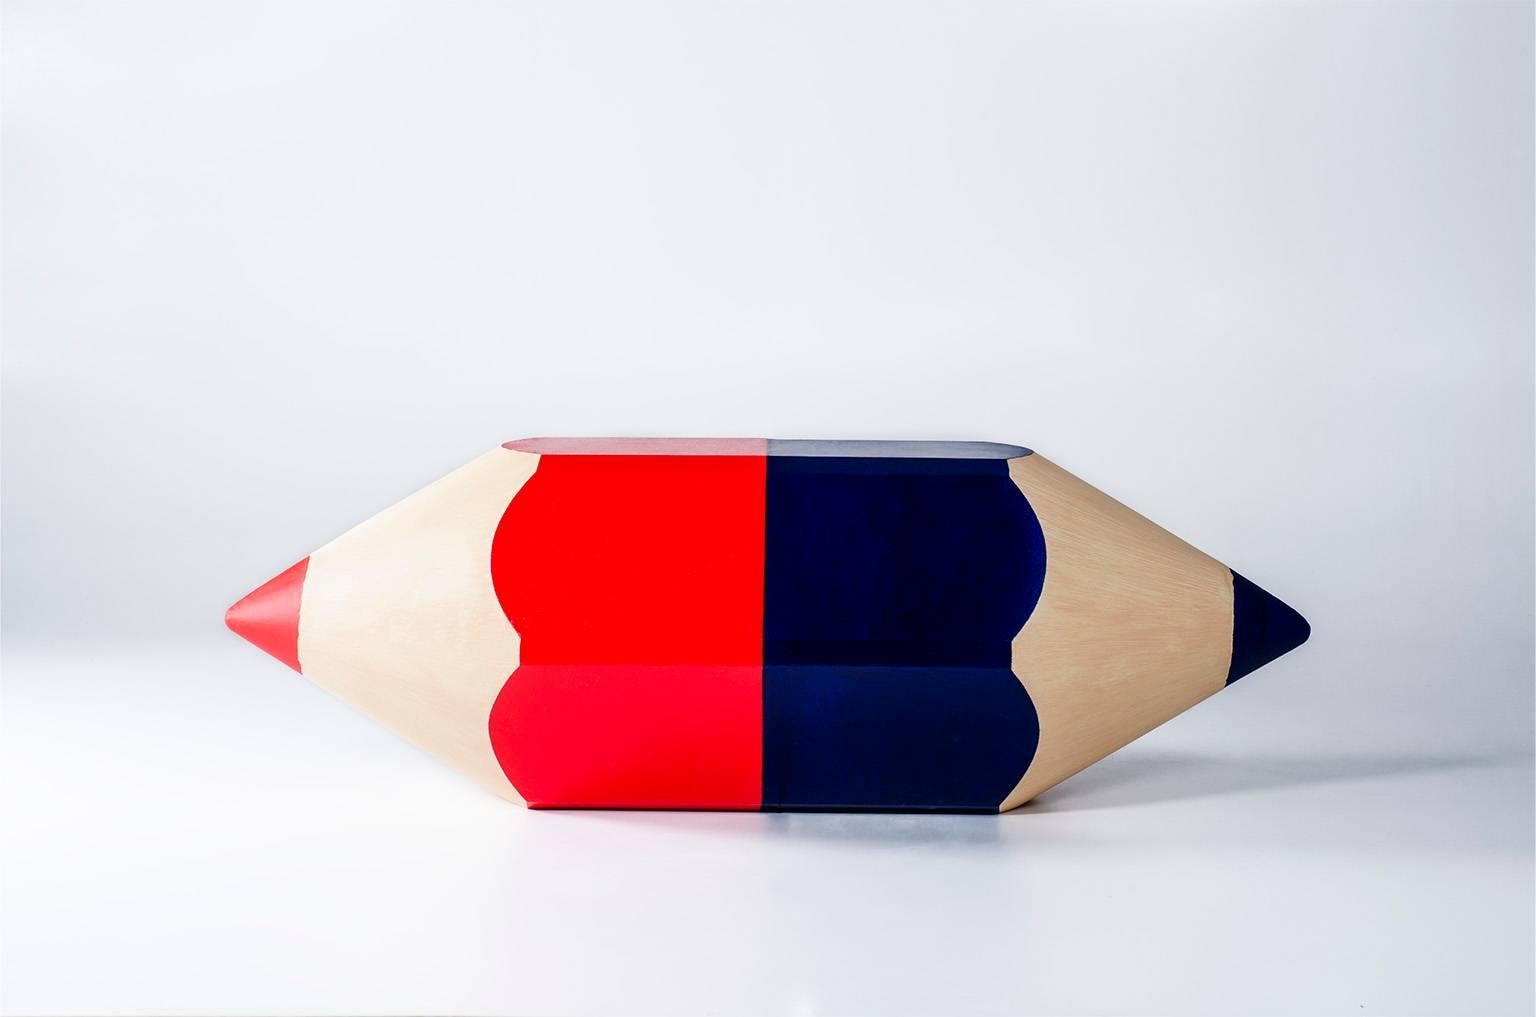 The most Feared of all the pencils.
That one that decided the destiny of tons of students in any schools.
Don’t have to be afraid of the red tick anymore, with the blue line now ,they are just innocent cosy tow seats pouffes.
Differentiated lift